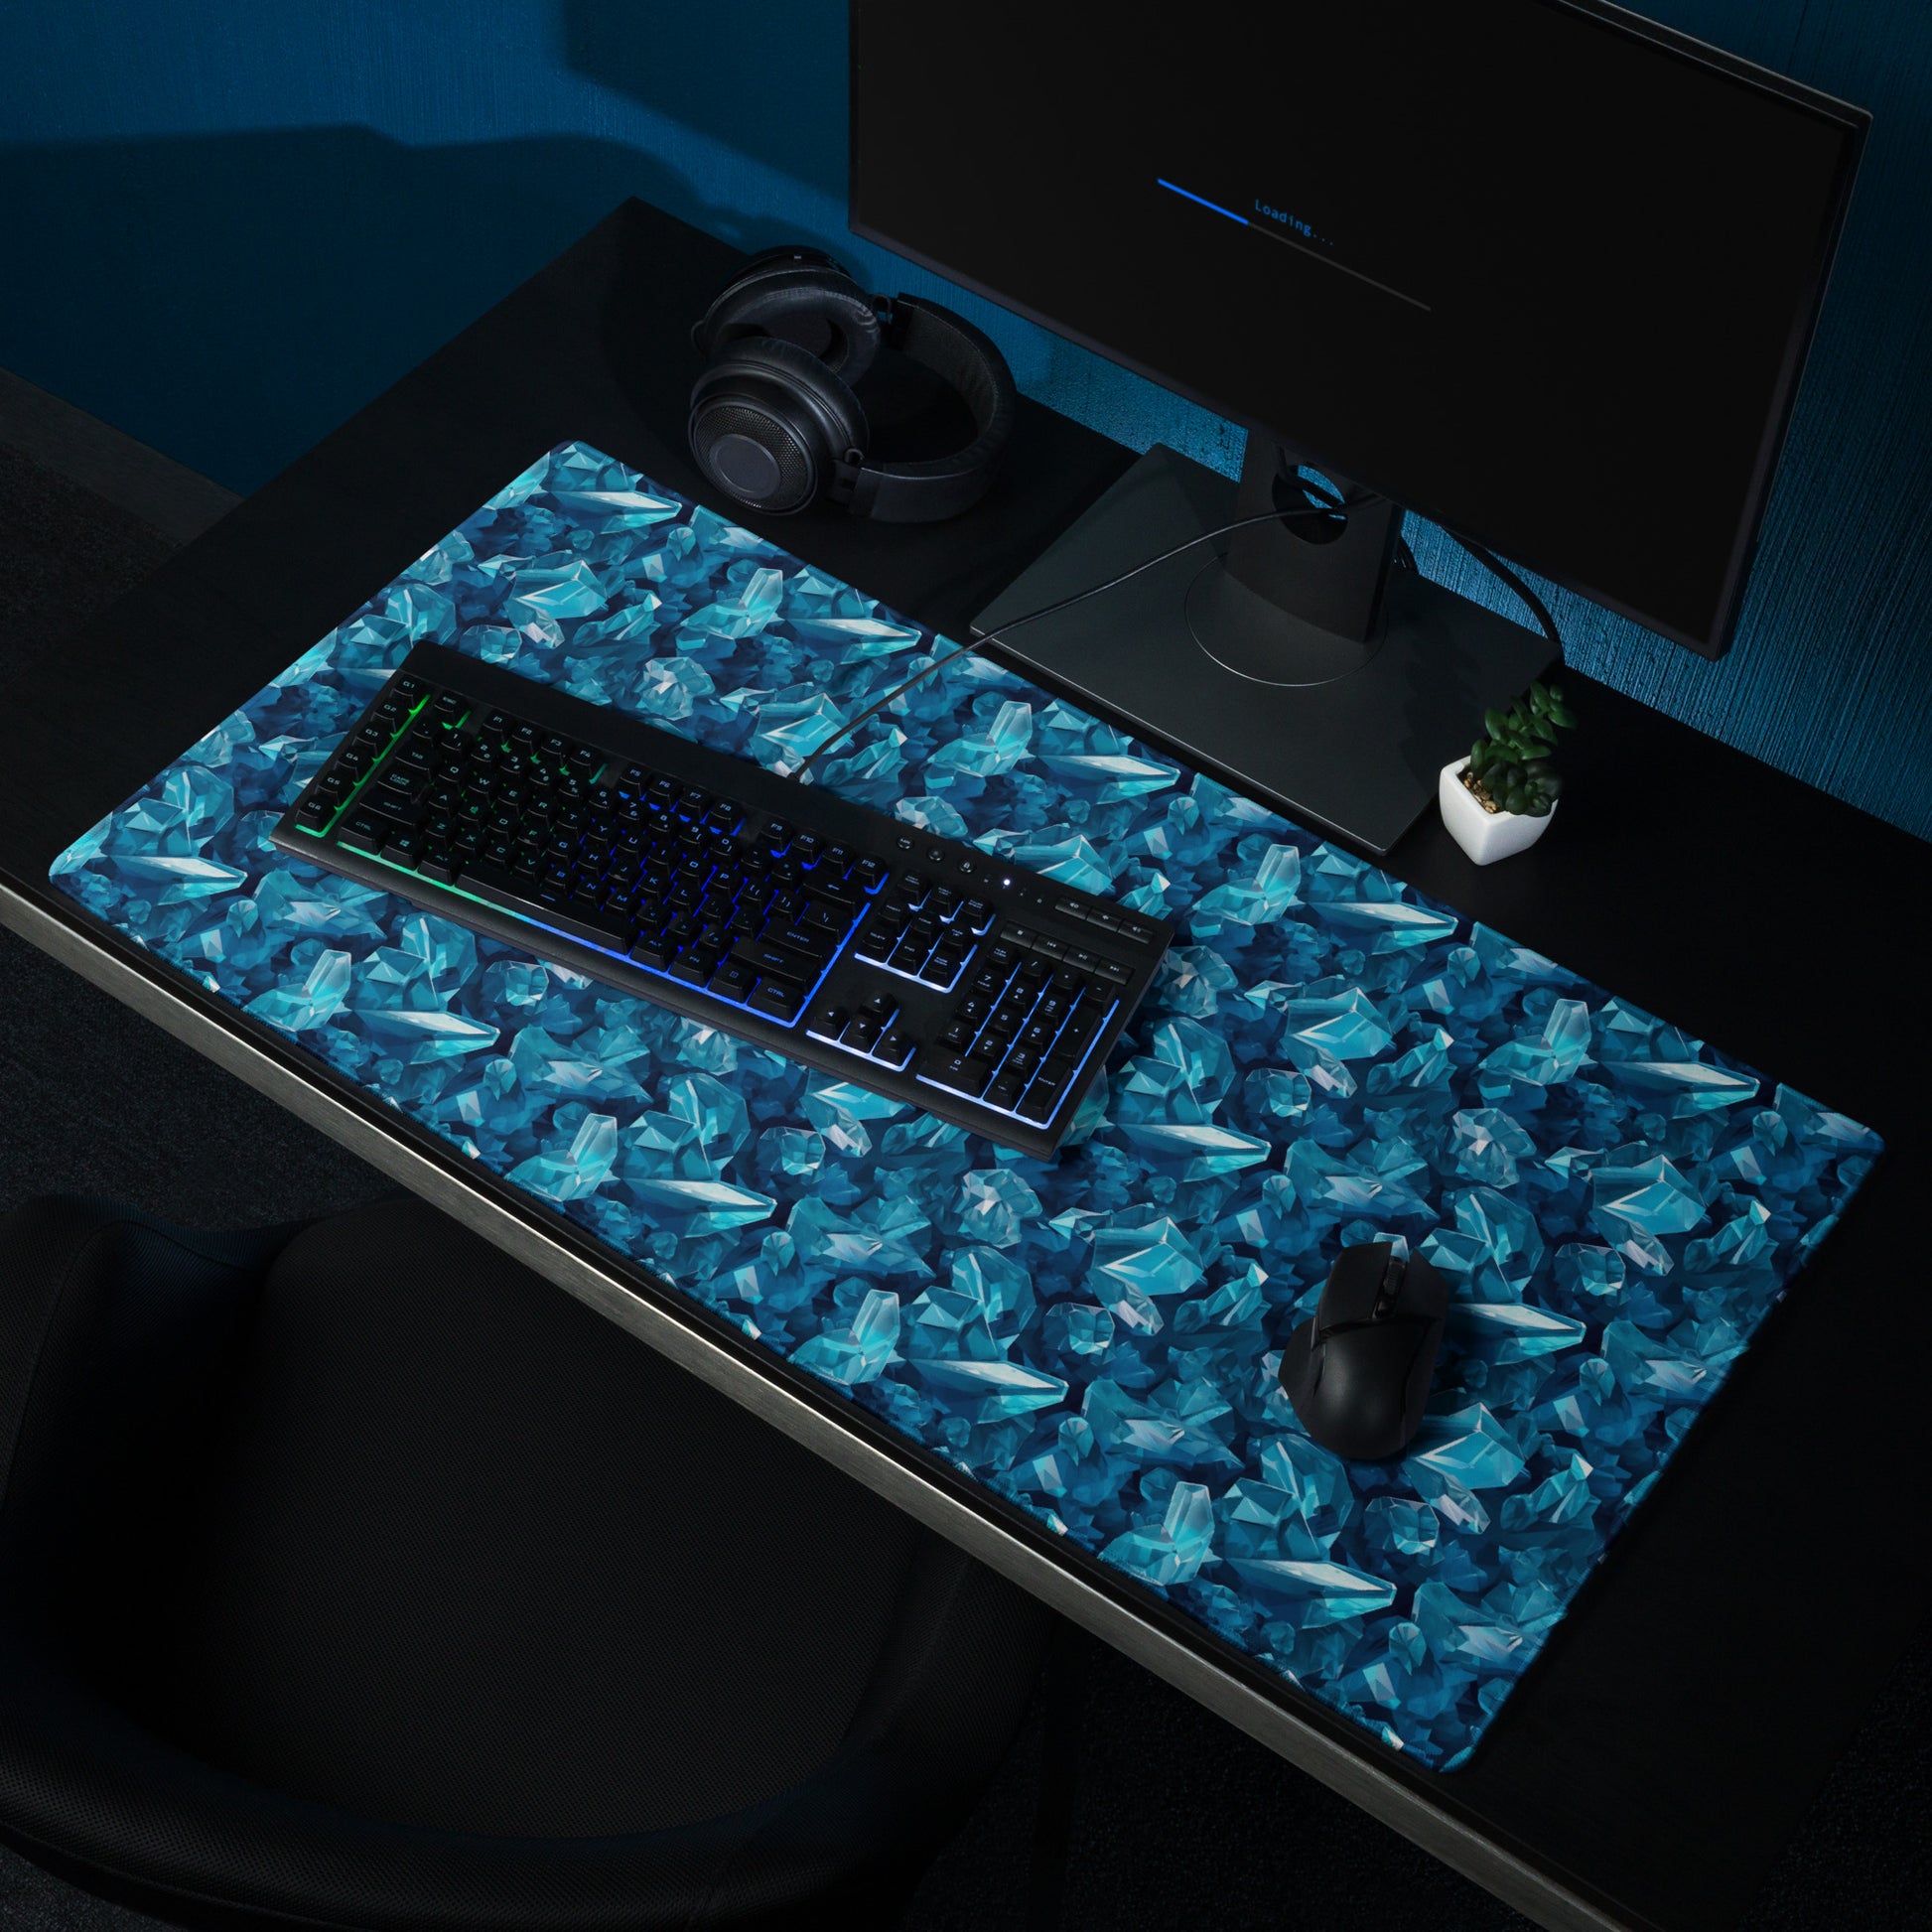 A 36" x 18" gaming desk pad with blue crystals. It sits on a black desk with a monitor, keyboard, and mouse.